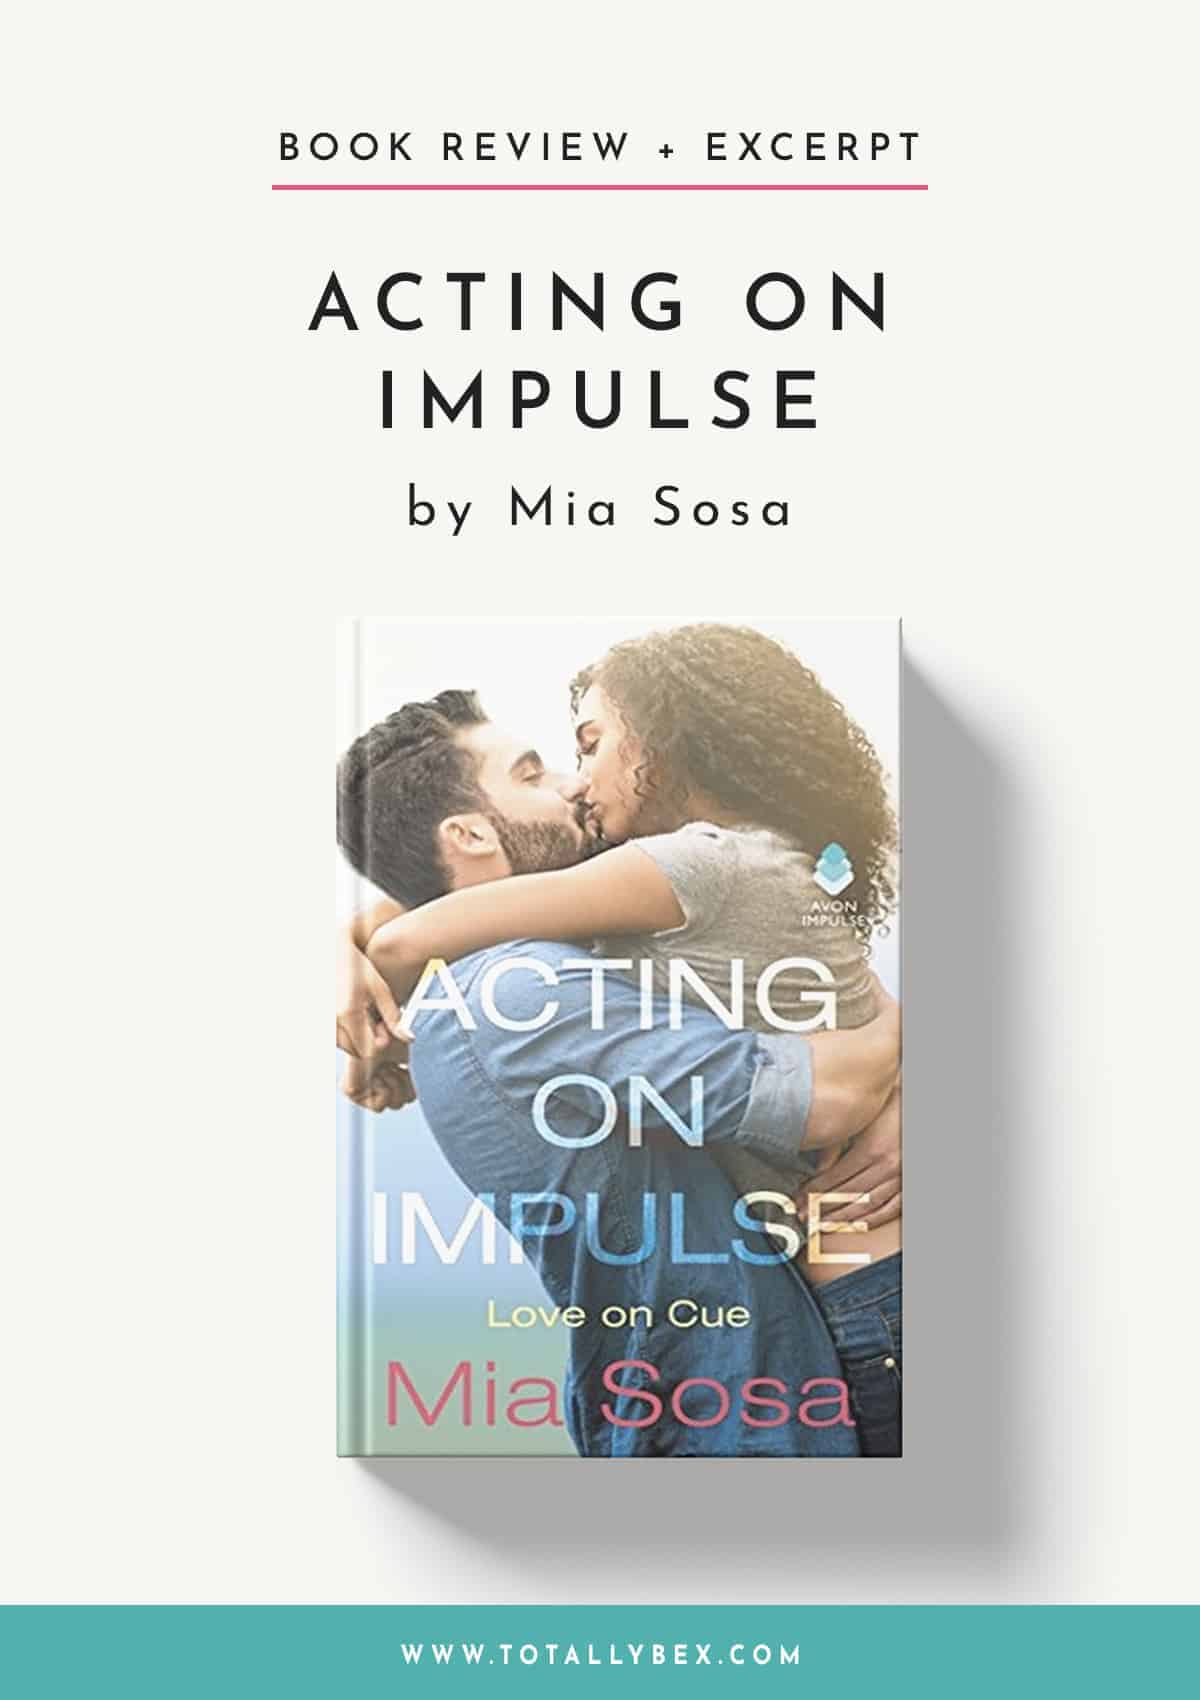 Acting on Impulse by Mia Sosa-Book Review+Excerpt